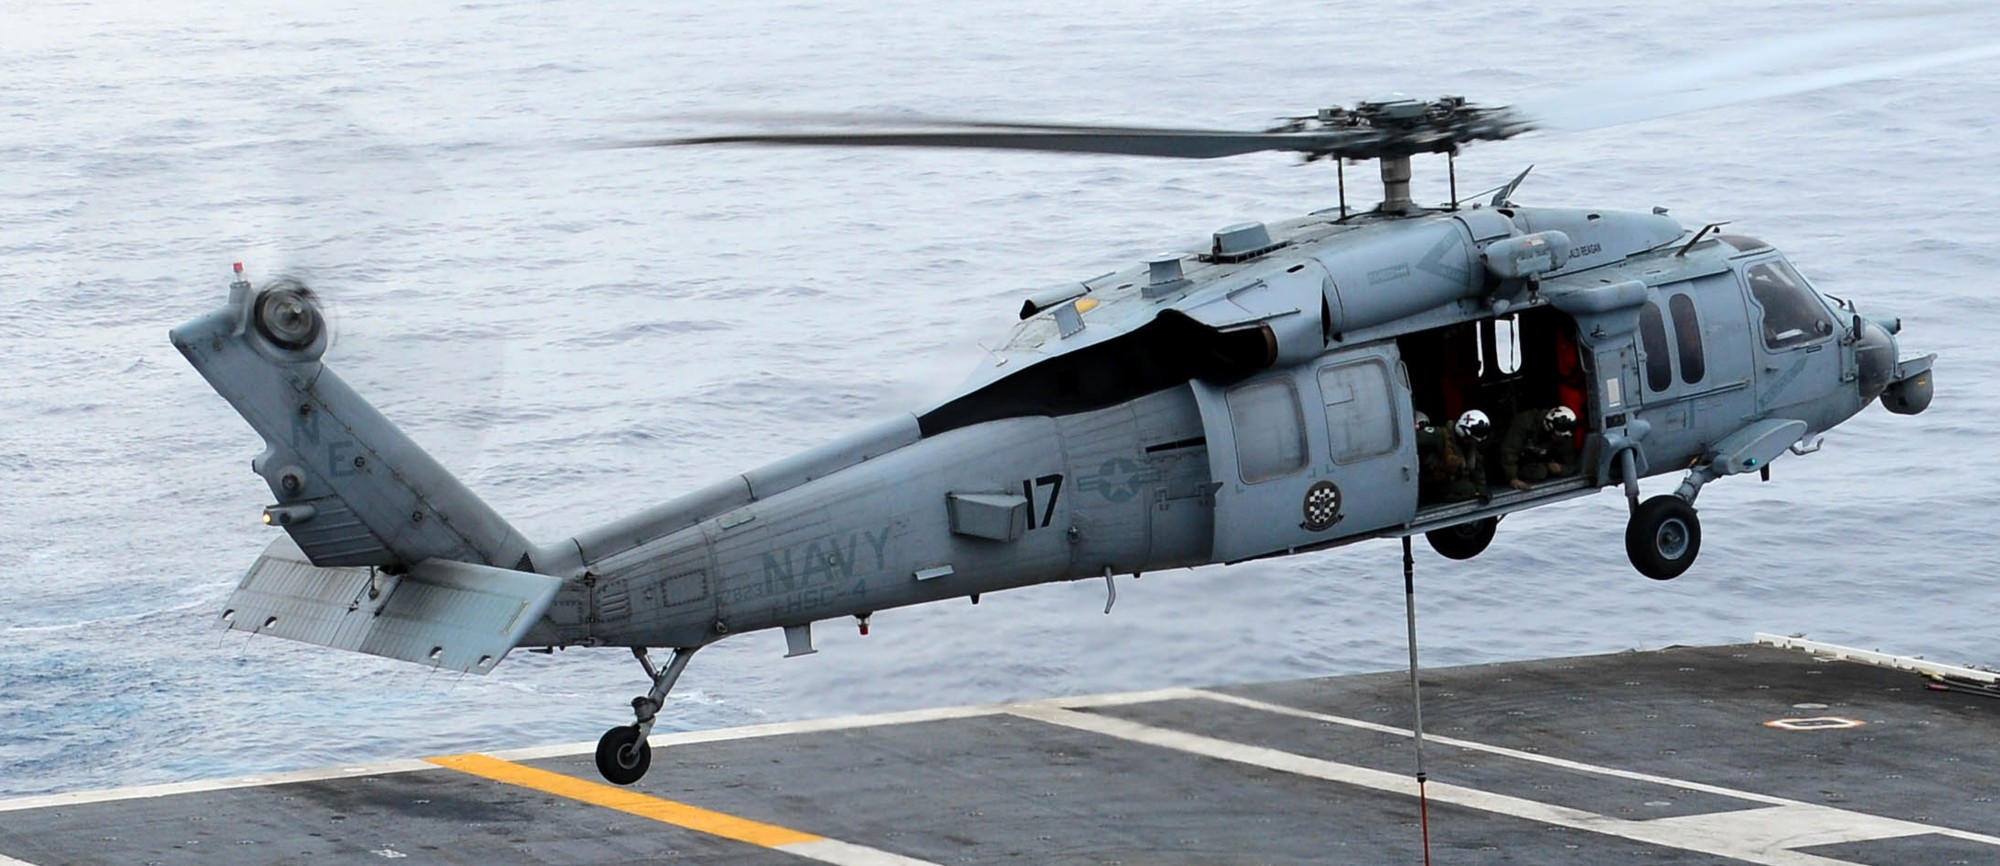 hsc-4 black knights helicopter sea combat squadron us navy mh-60s seahawk 2014 42